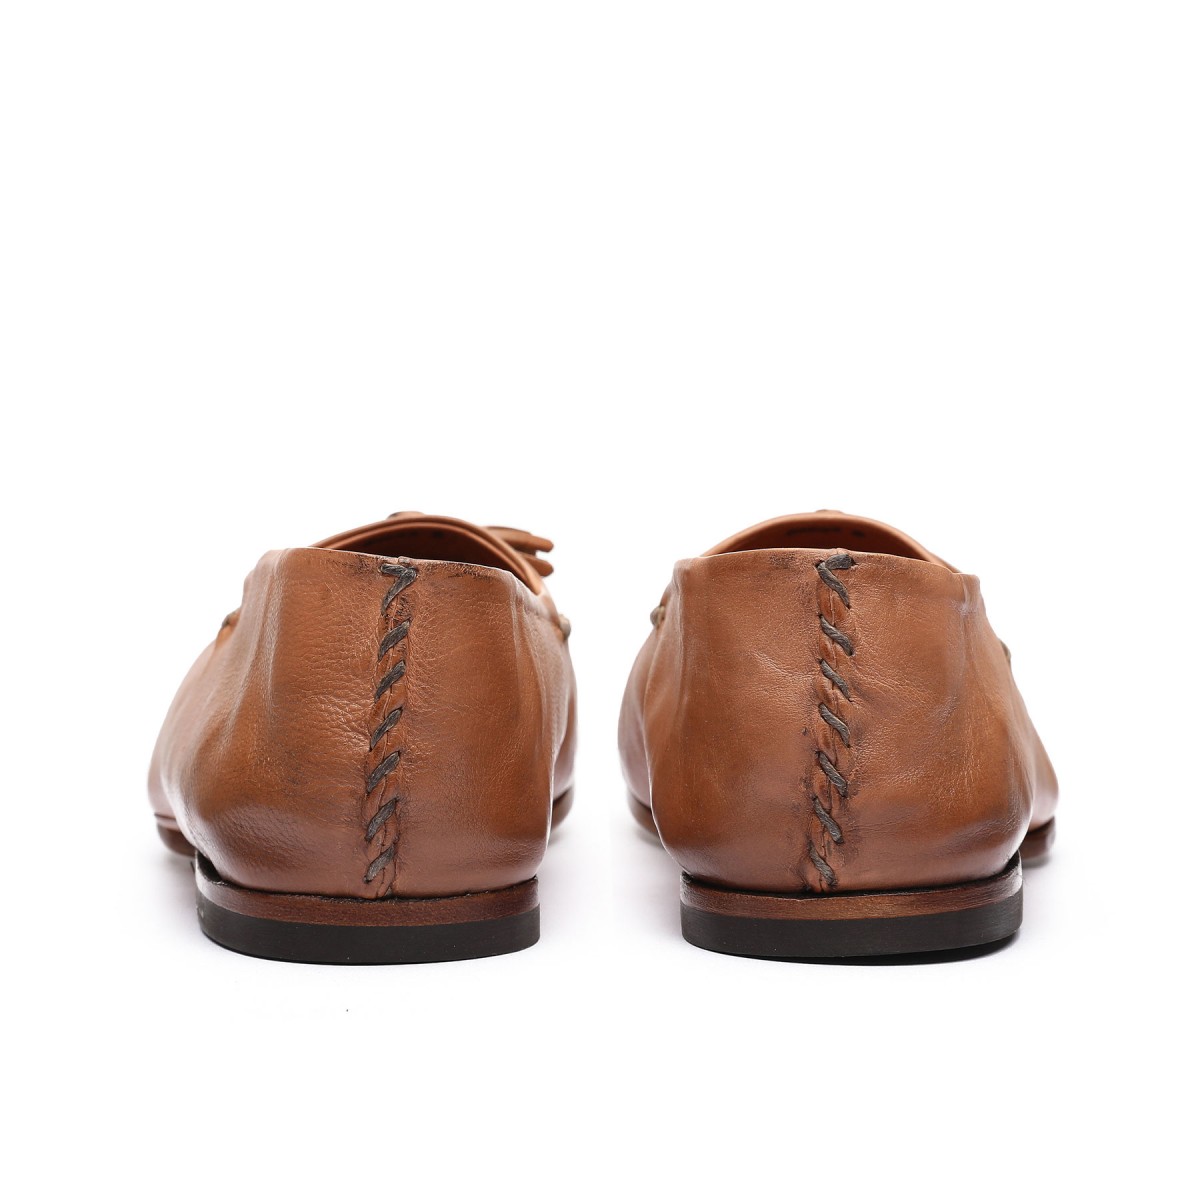 Brandy hue leather loafers